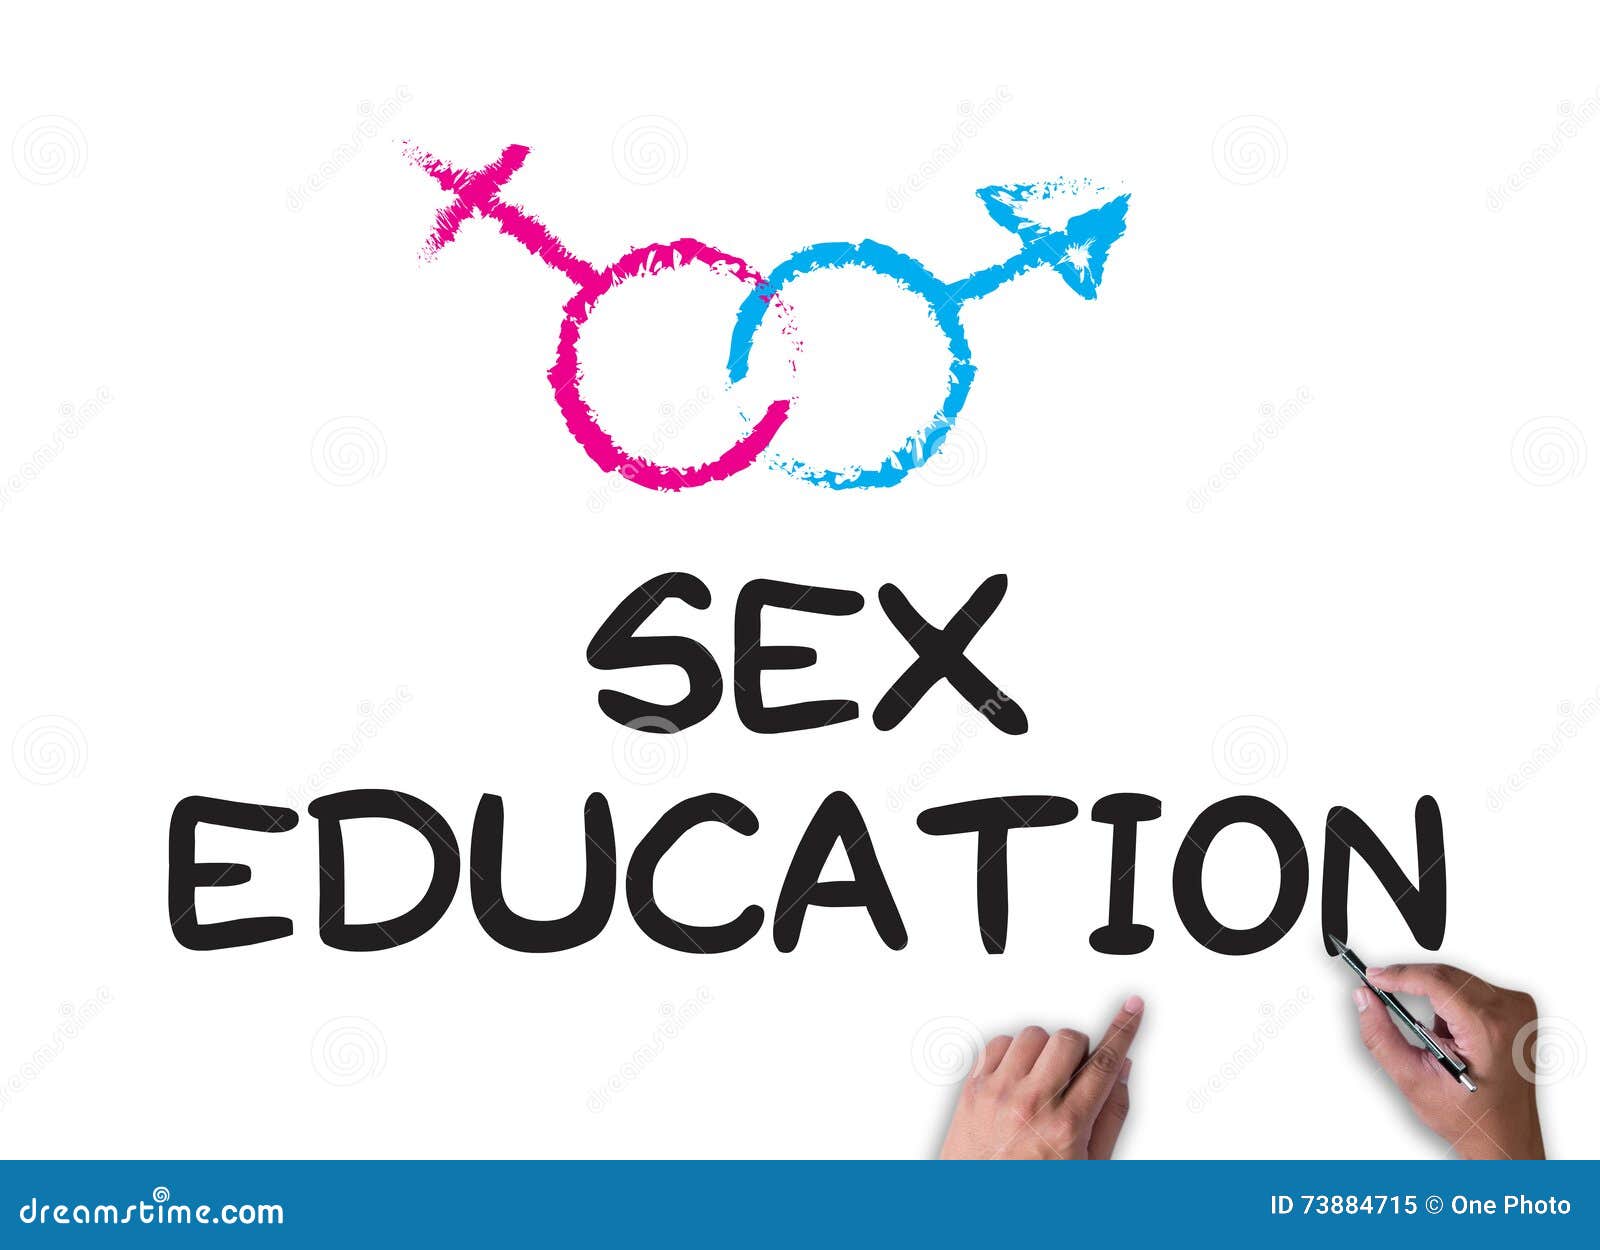 Photo about sex education businessman work on white broad, top view. 